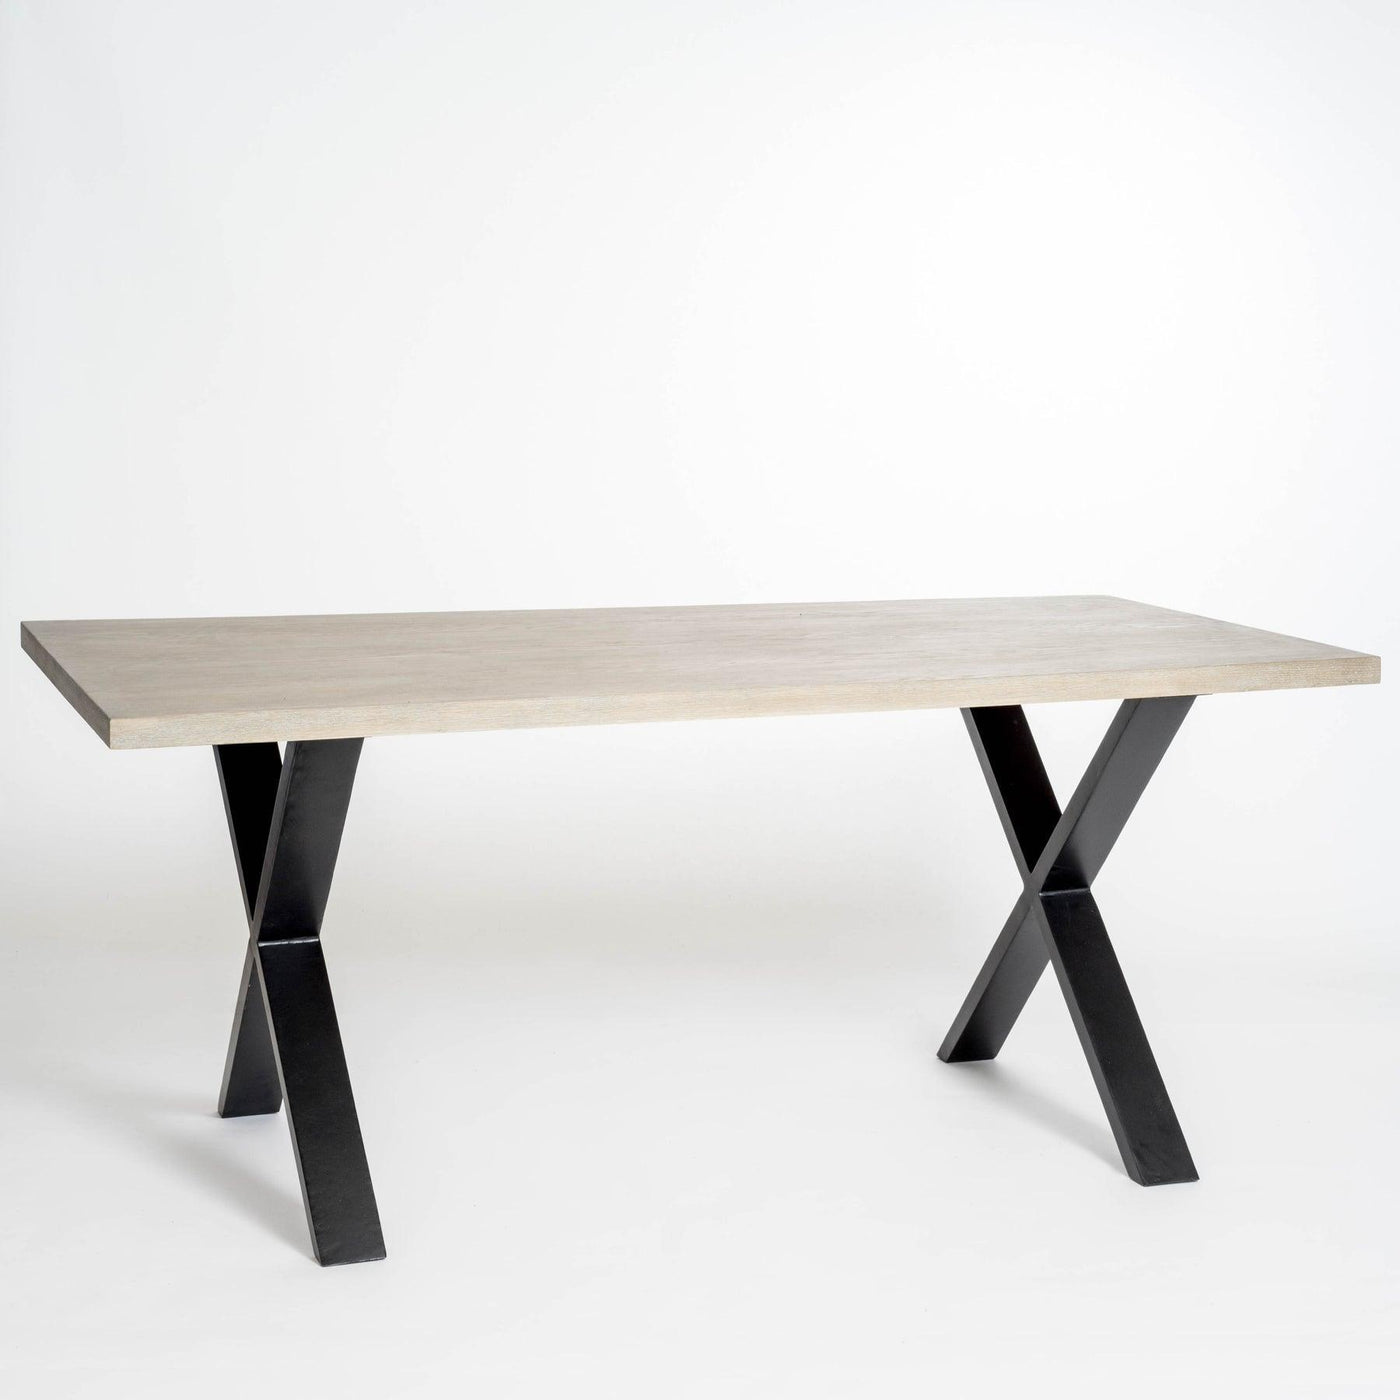 Pershore Dining Table by DI Designs-Esme Furnishings